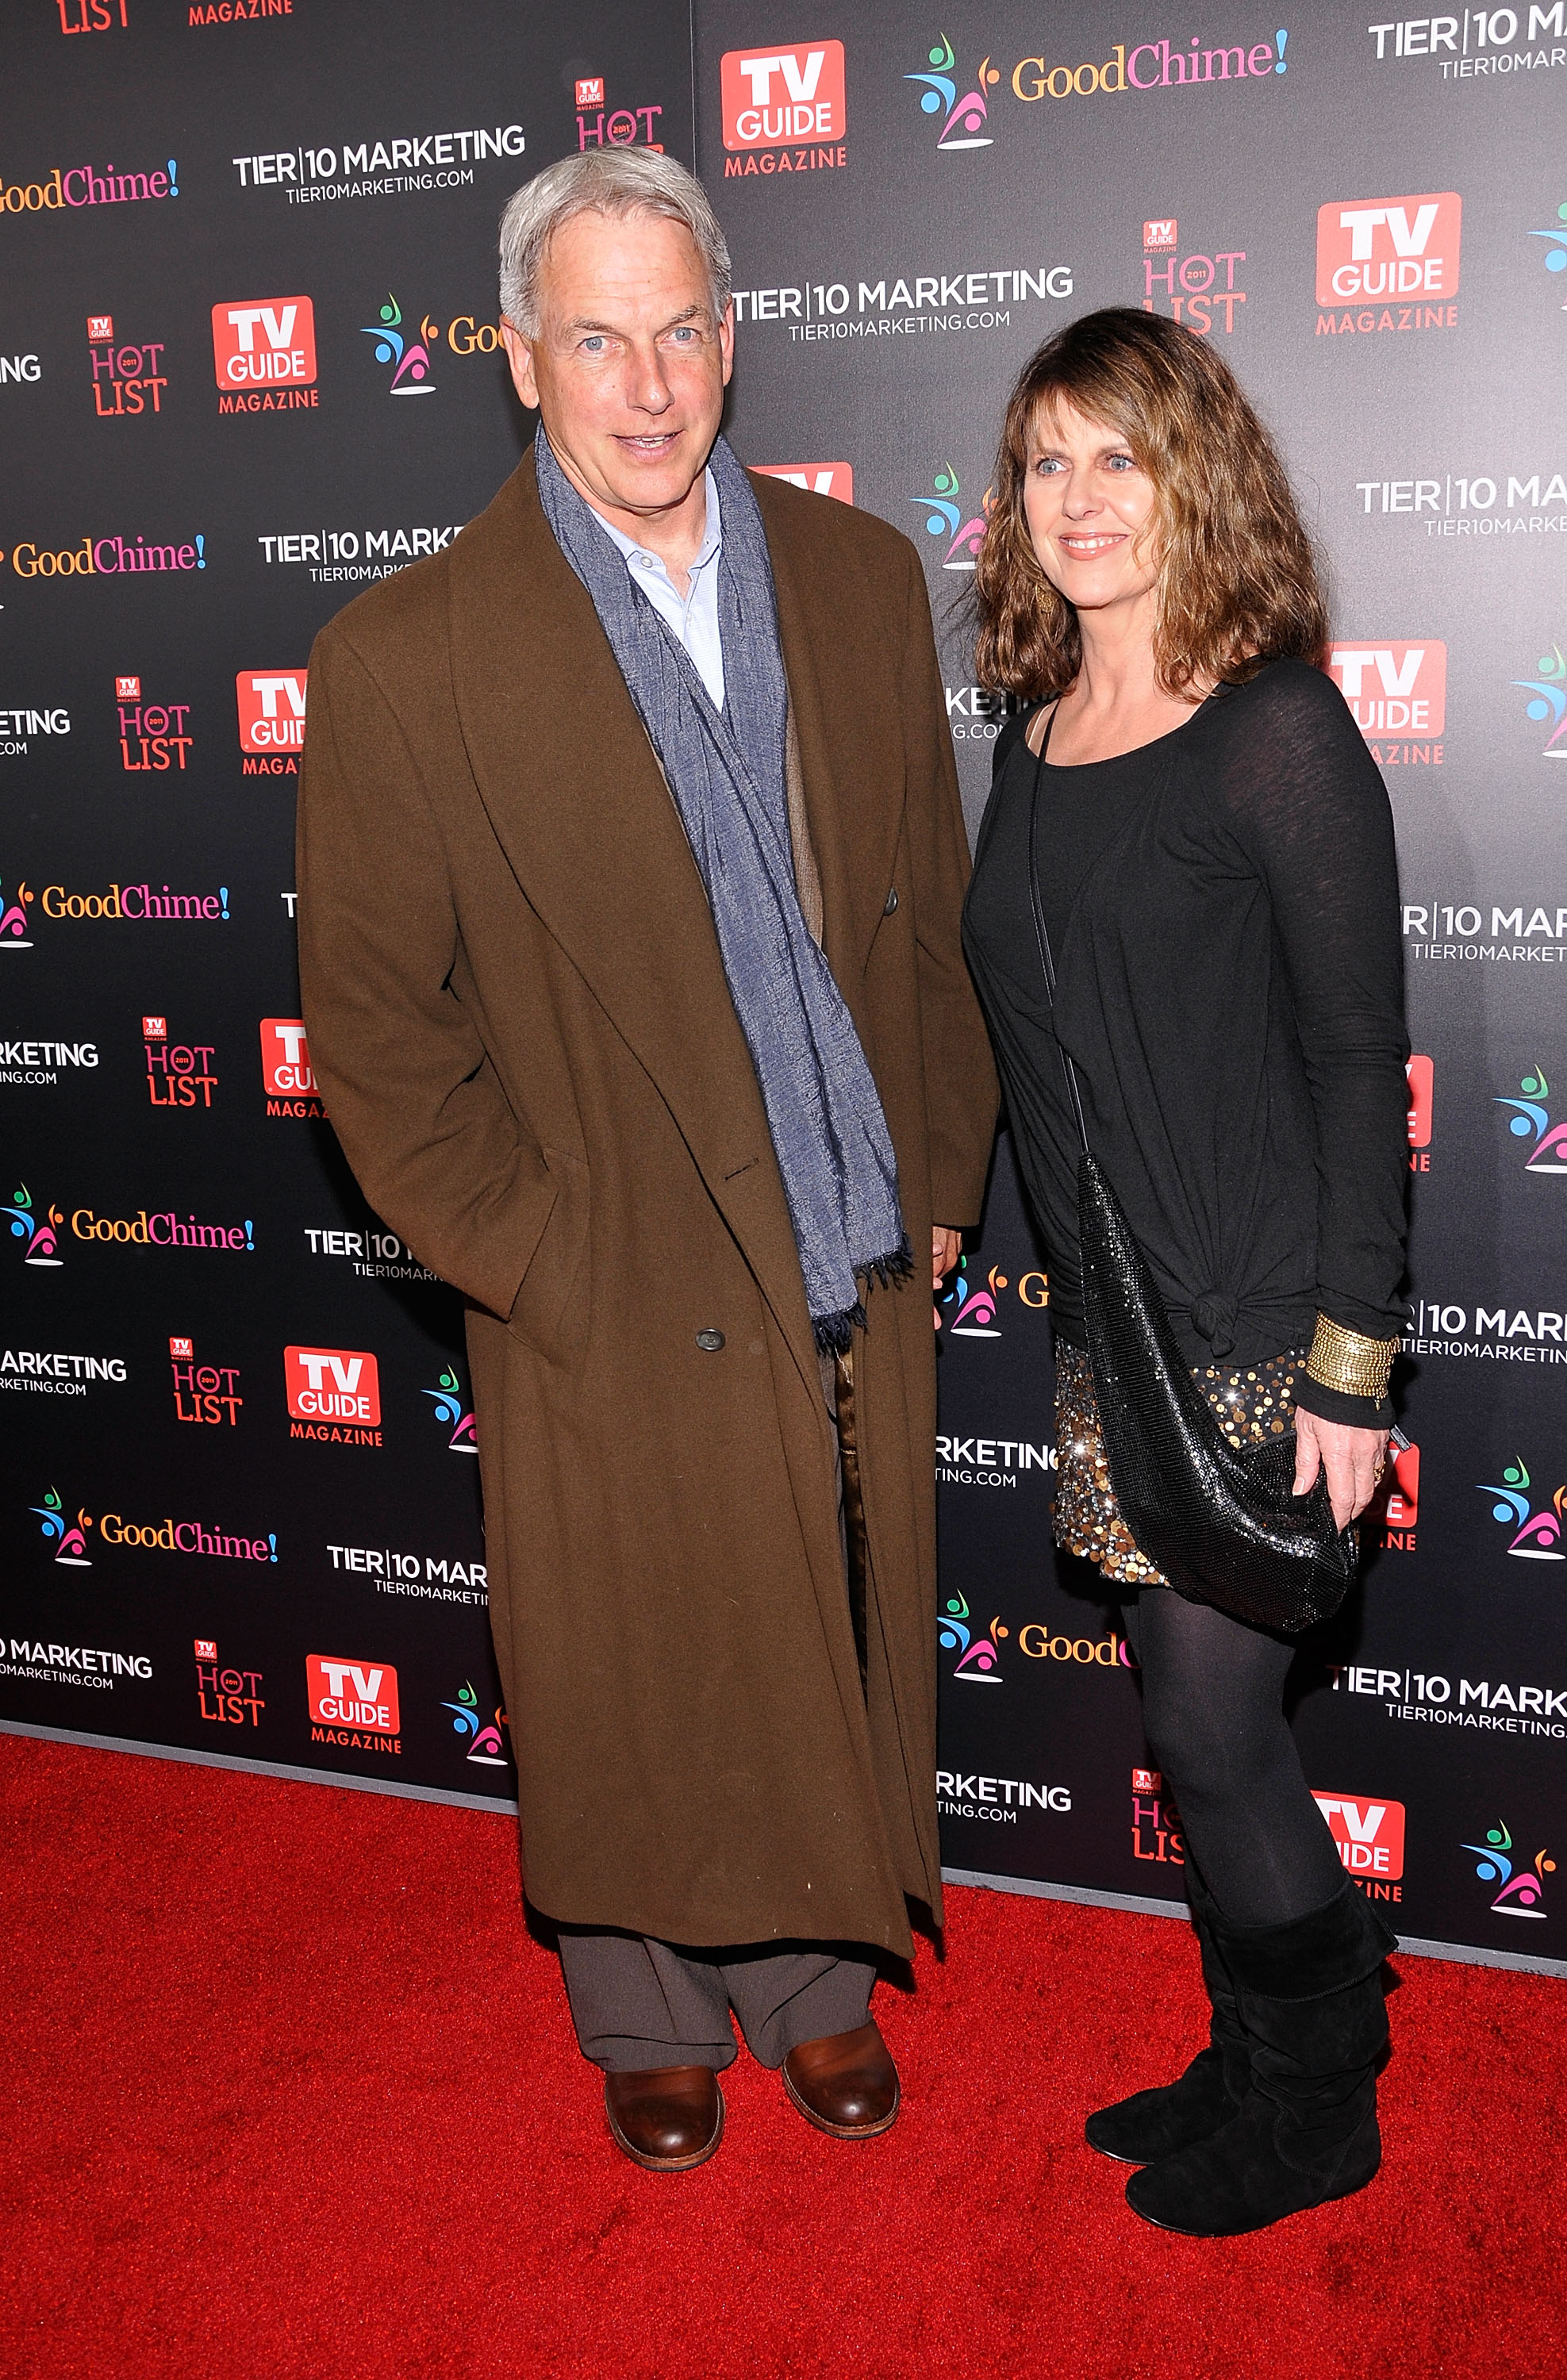 Actor Mark Harmon arrives with wife Pam Dawber at TV Guide magazine's Annual Hot List Party at Greystone Mansion Supperclub on November 7, 2011 in Beverly Hills, California | Source: Getty Images